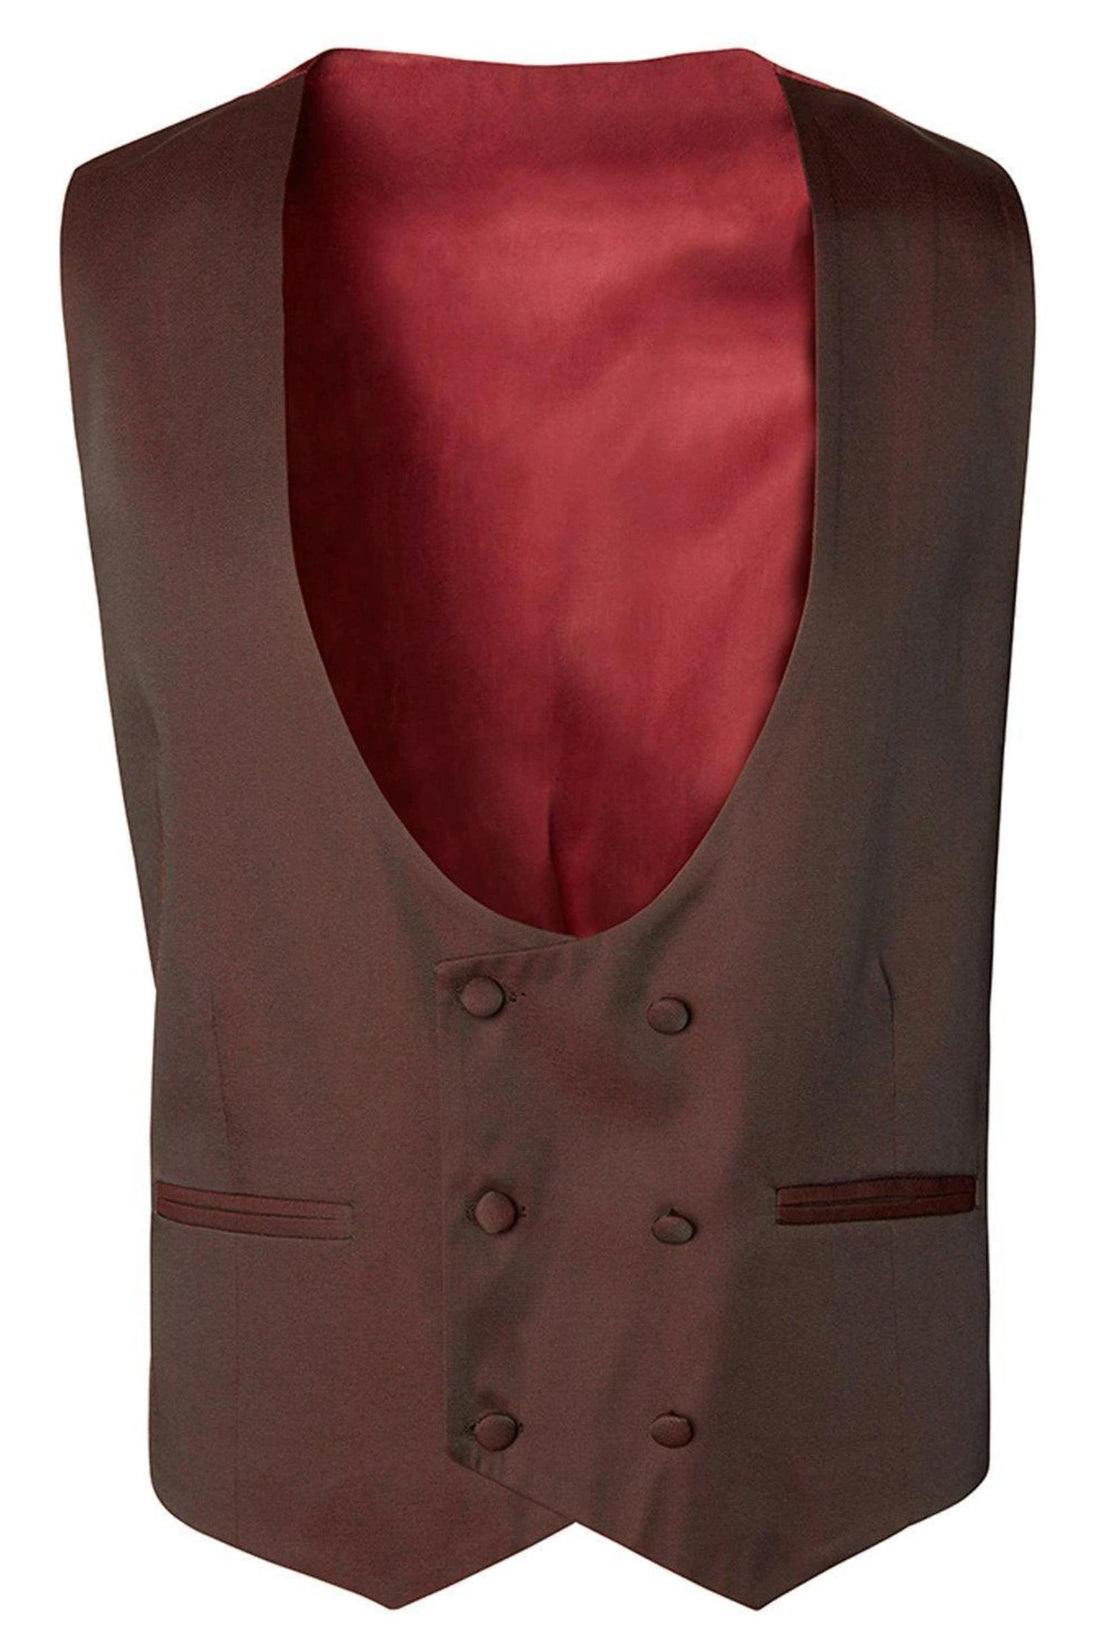 U SHAPED DOUBLE BREASTED VEST - BURGUNDY - Ron Tomson